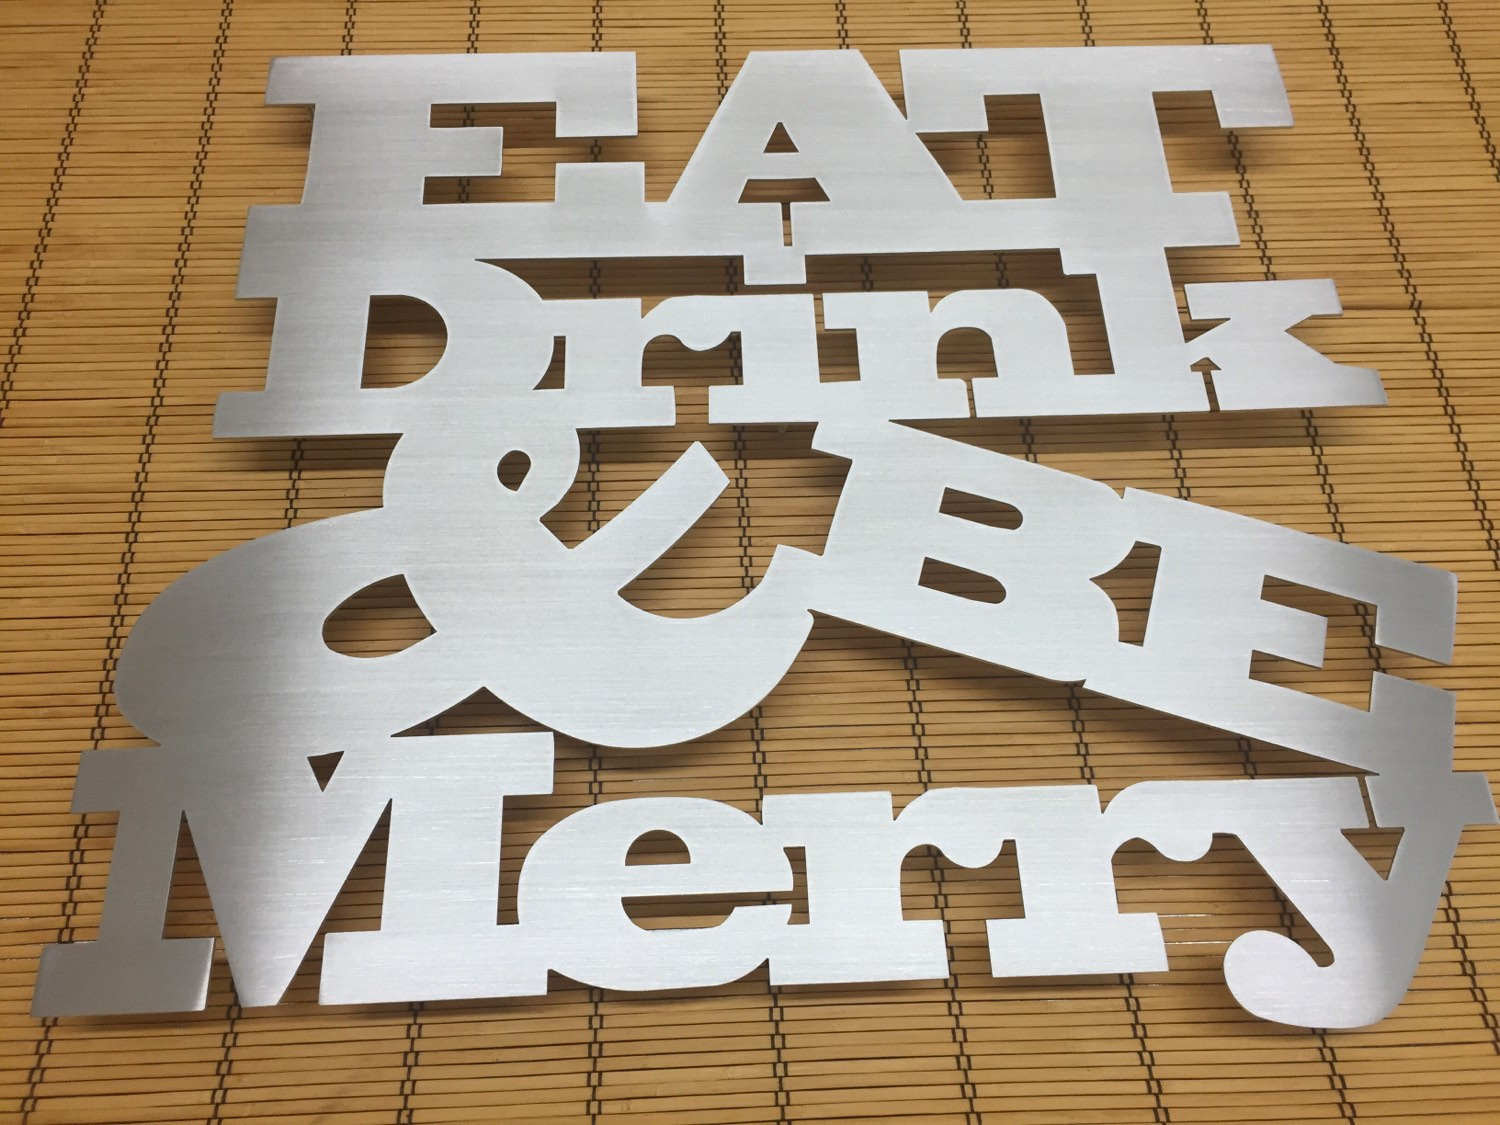 Metal Wall Art For Kitchen
 Eat Drink Be Merry Metal Wall Art Kitchen Art by INSPIREMEtals